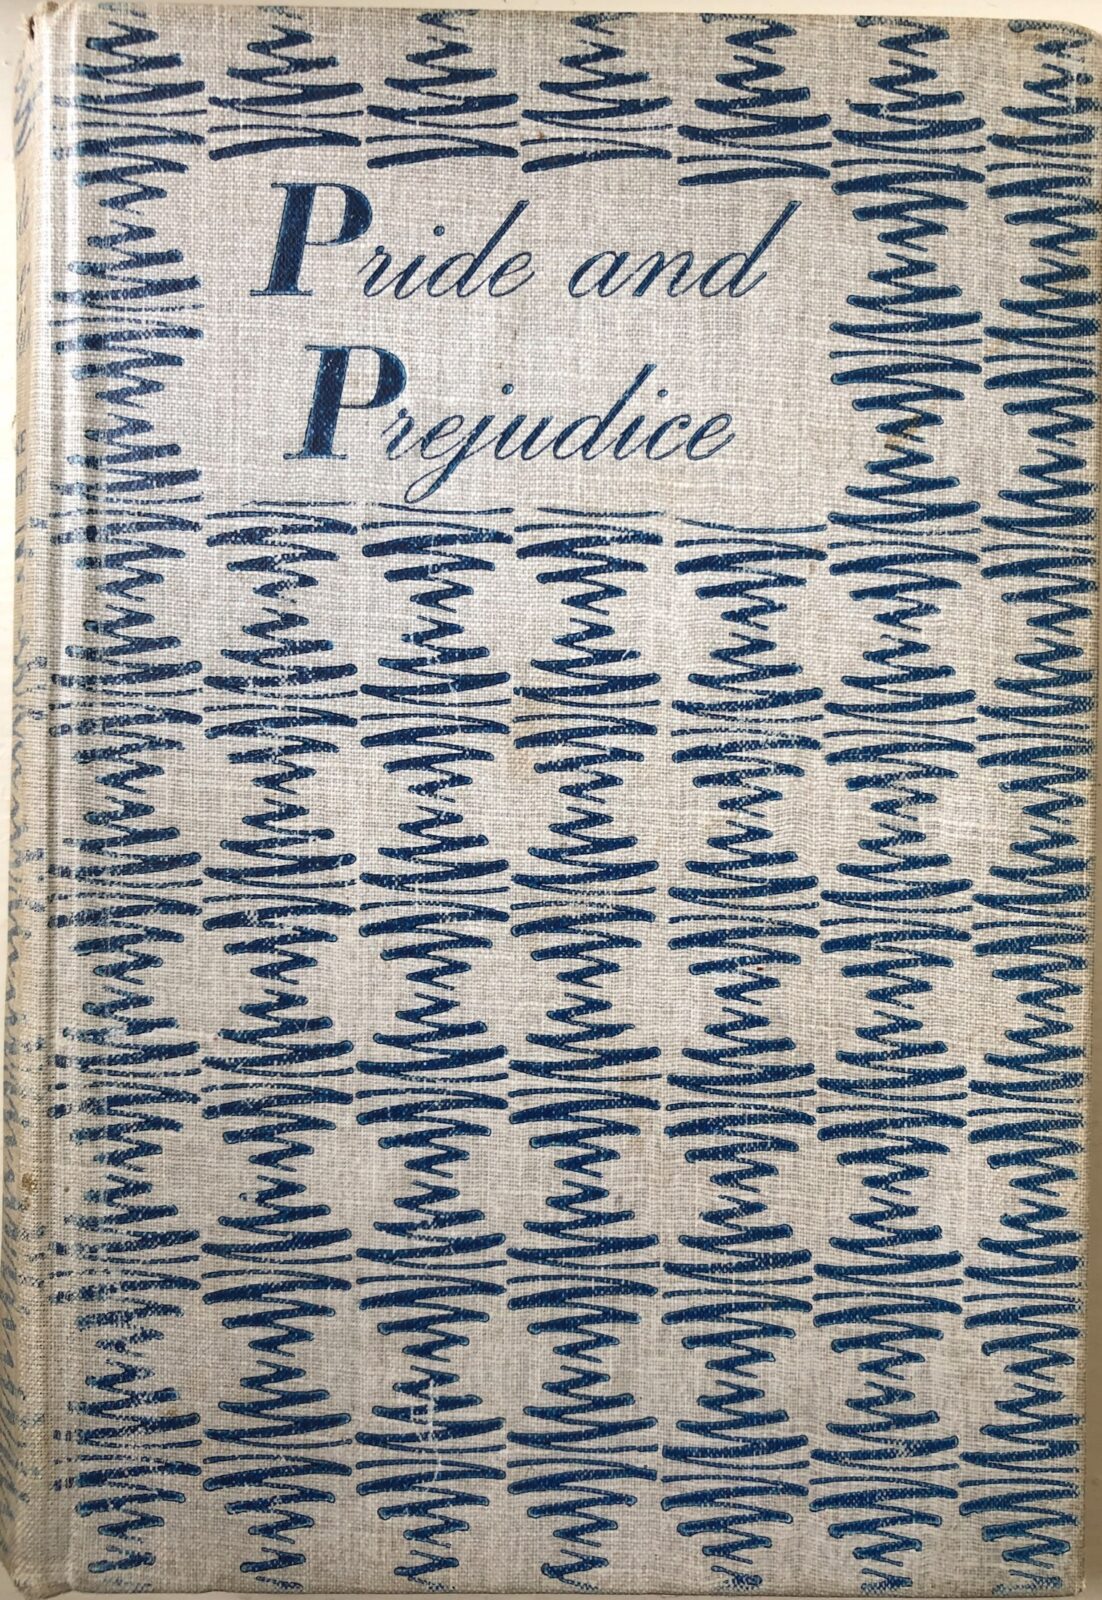 Front cover of Pride & Prejudice, illustrated by Maximilien Vox 1933